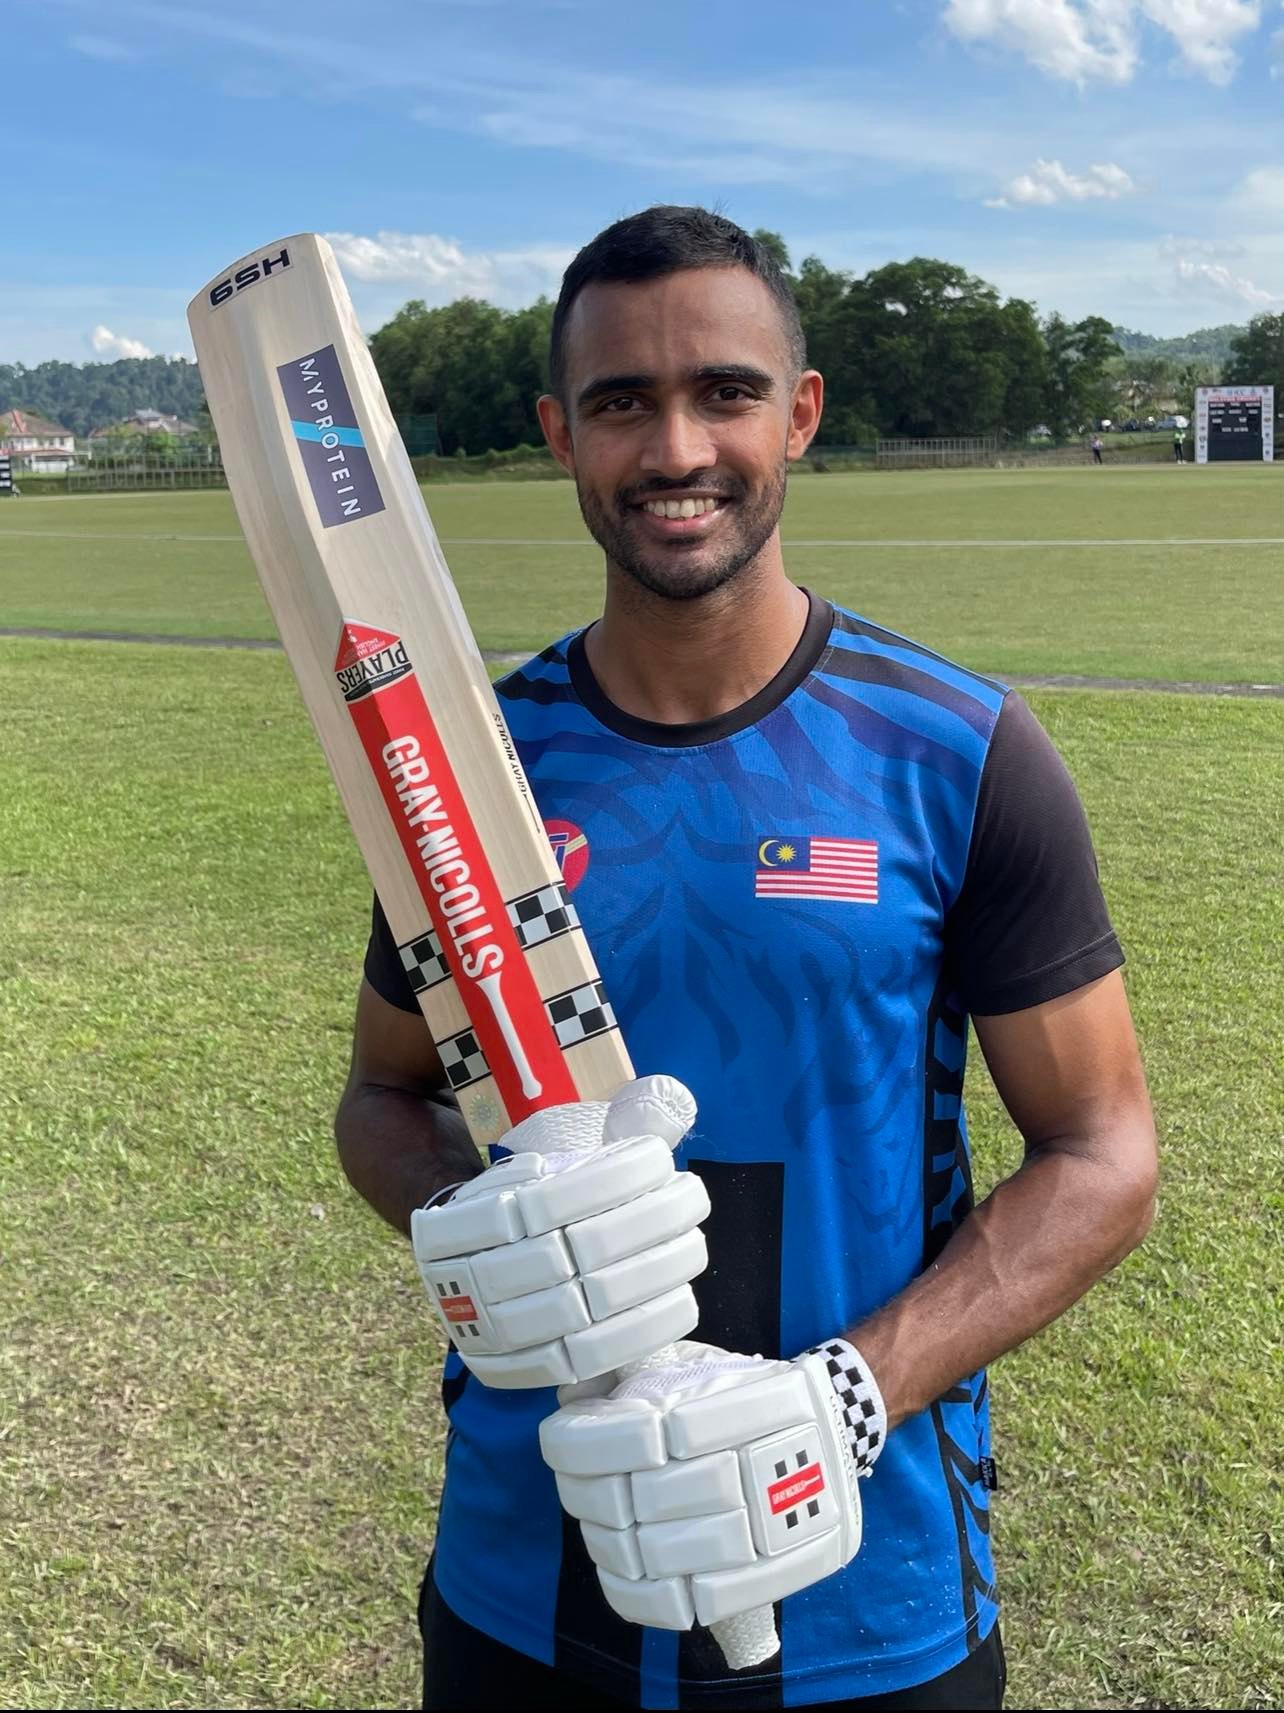 Harinder was selected to join the Malaysian national cricket team in 2016, and has been actively playing the sport since he was 12. Image credit: Harinder Sekhon